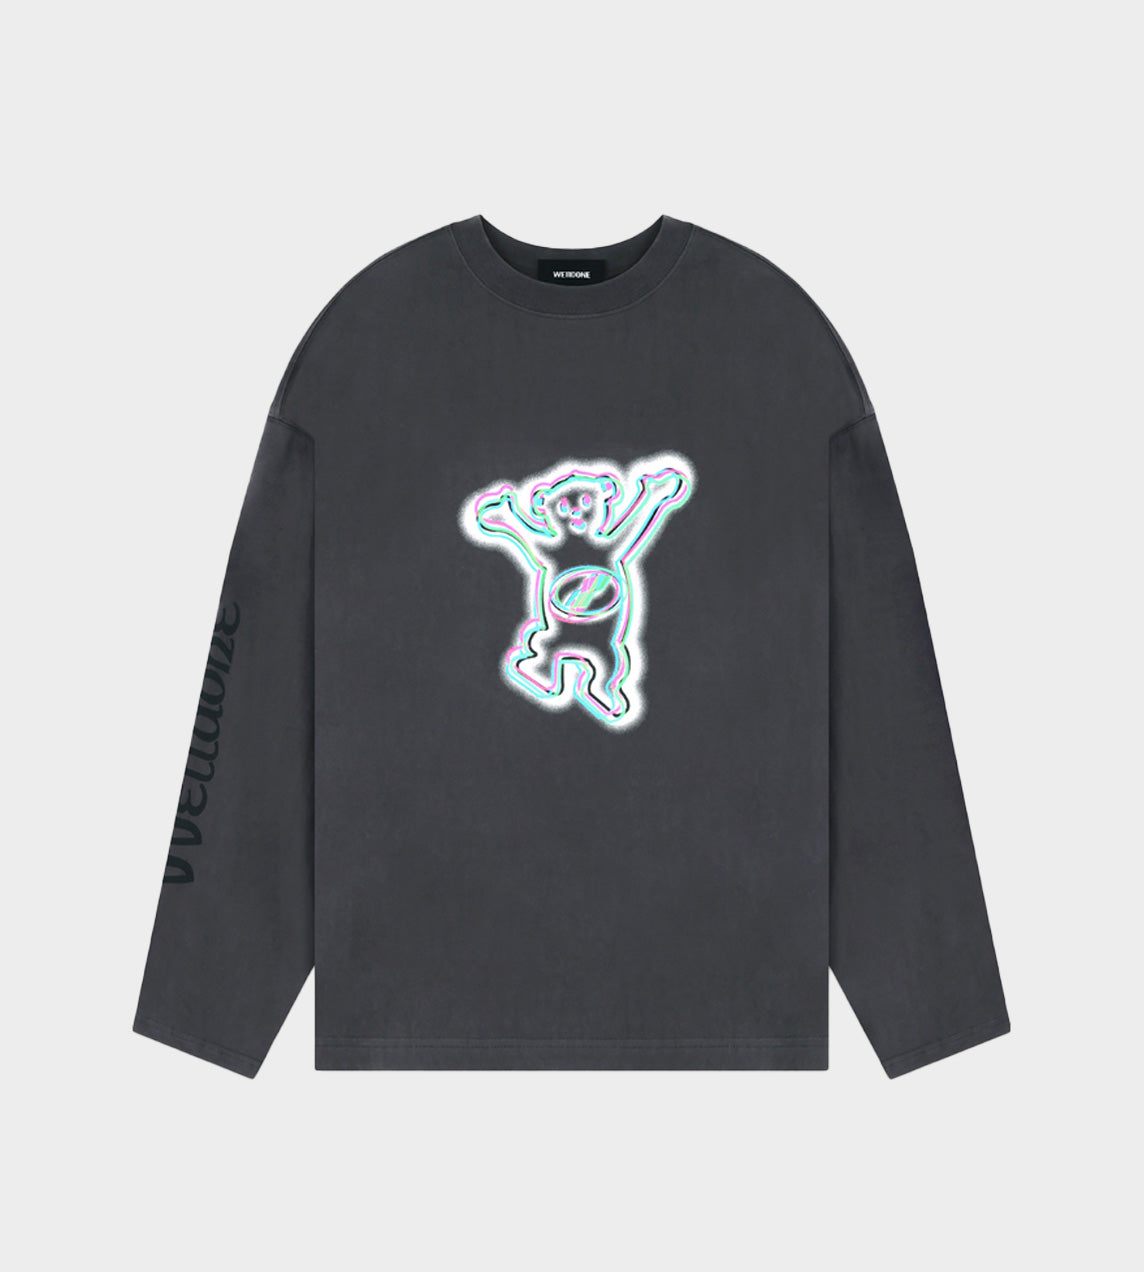 WE11DONE - Colourful Teddy Long Sleeve T Charcoal